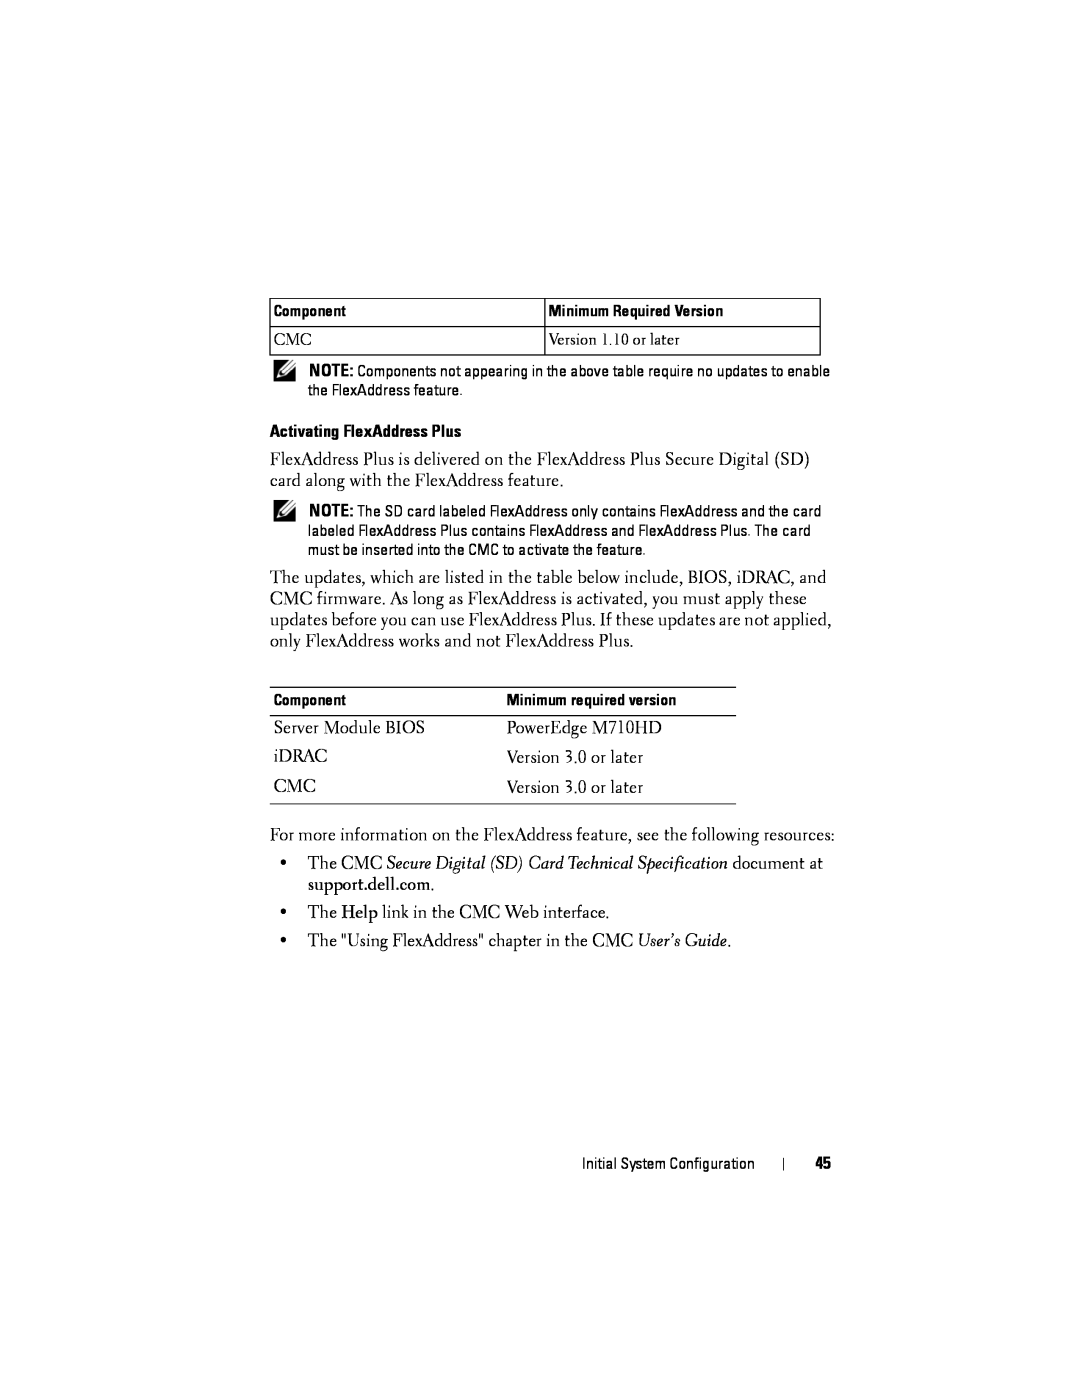 Dell M1000E manual Activating FlexAddress Plus, Version 1.10 or later 